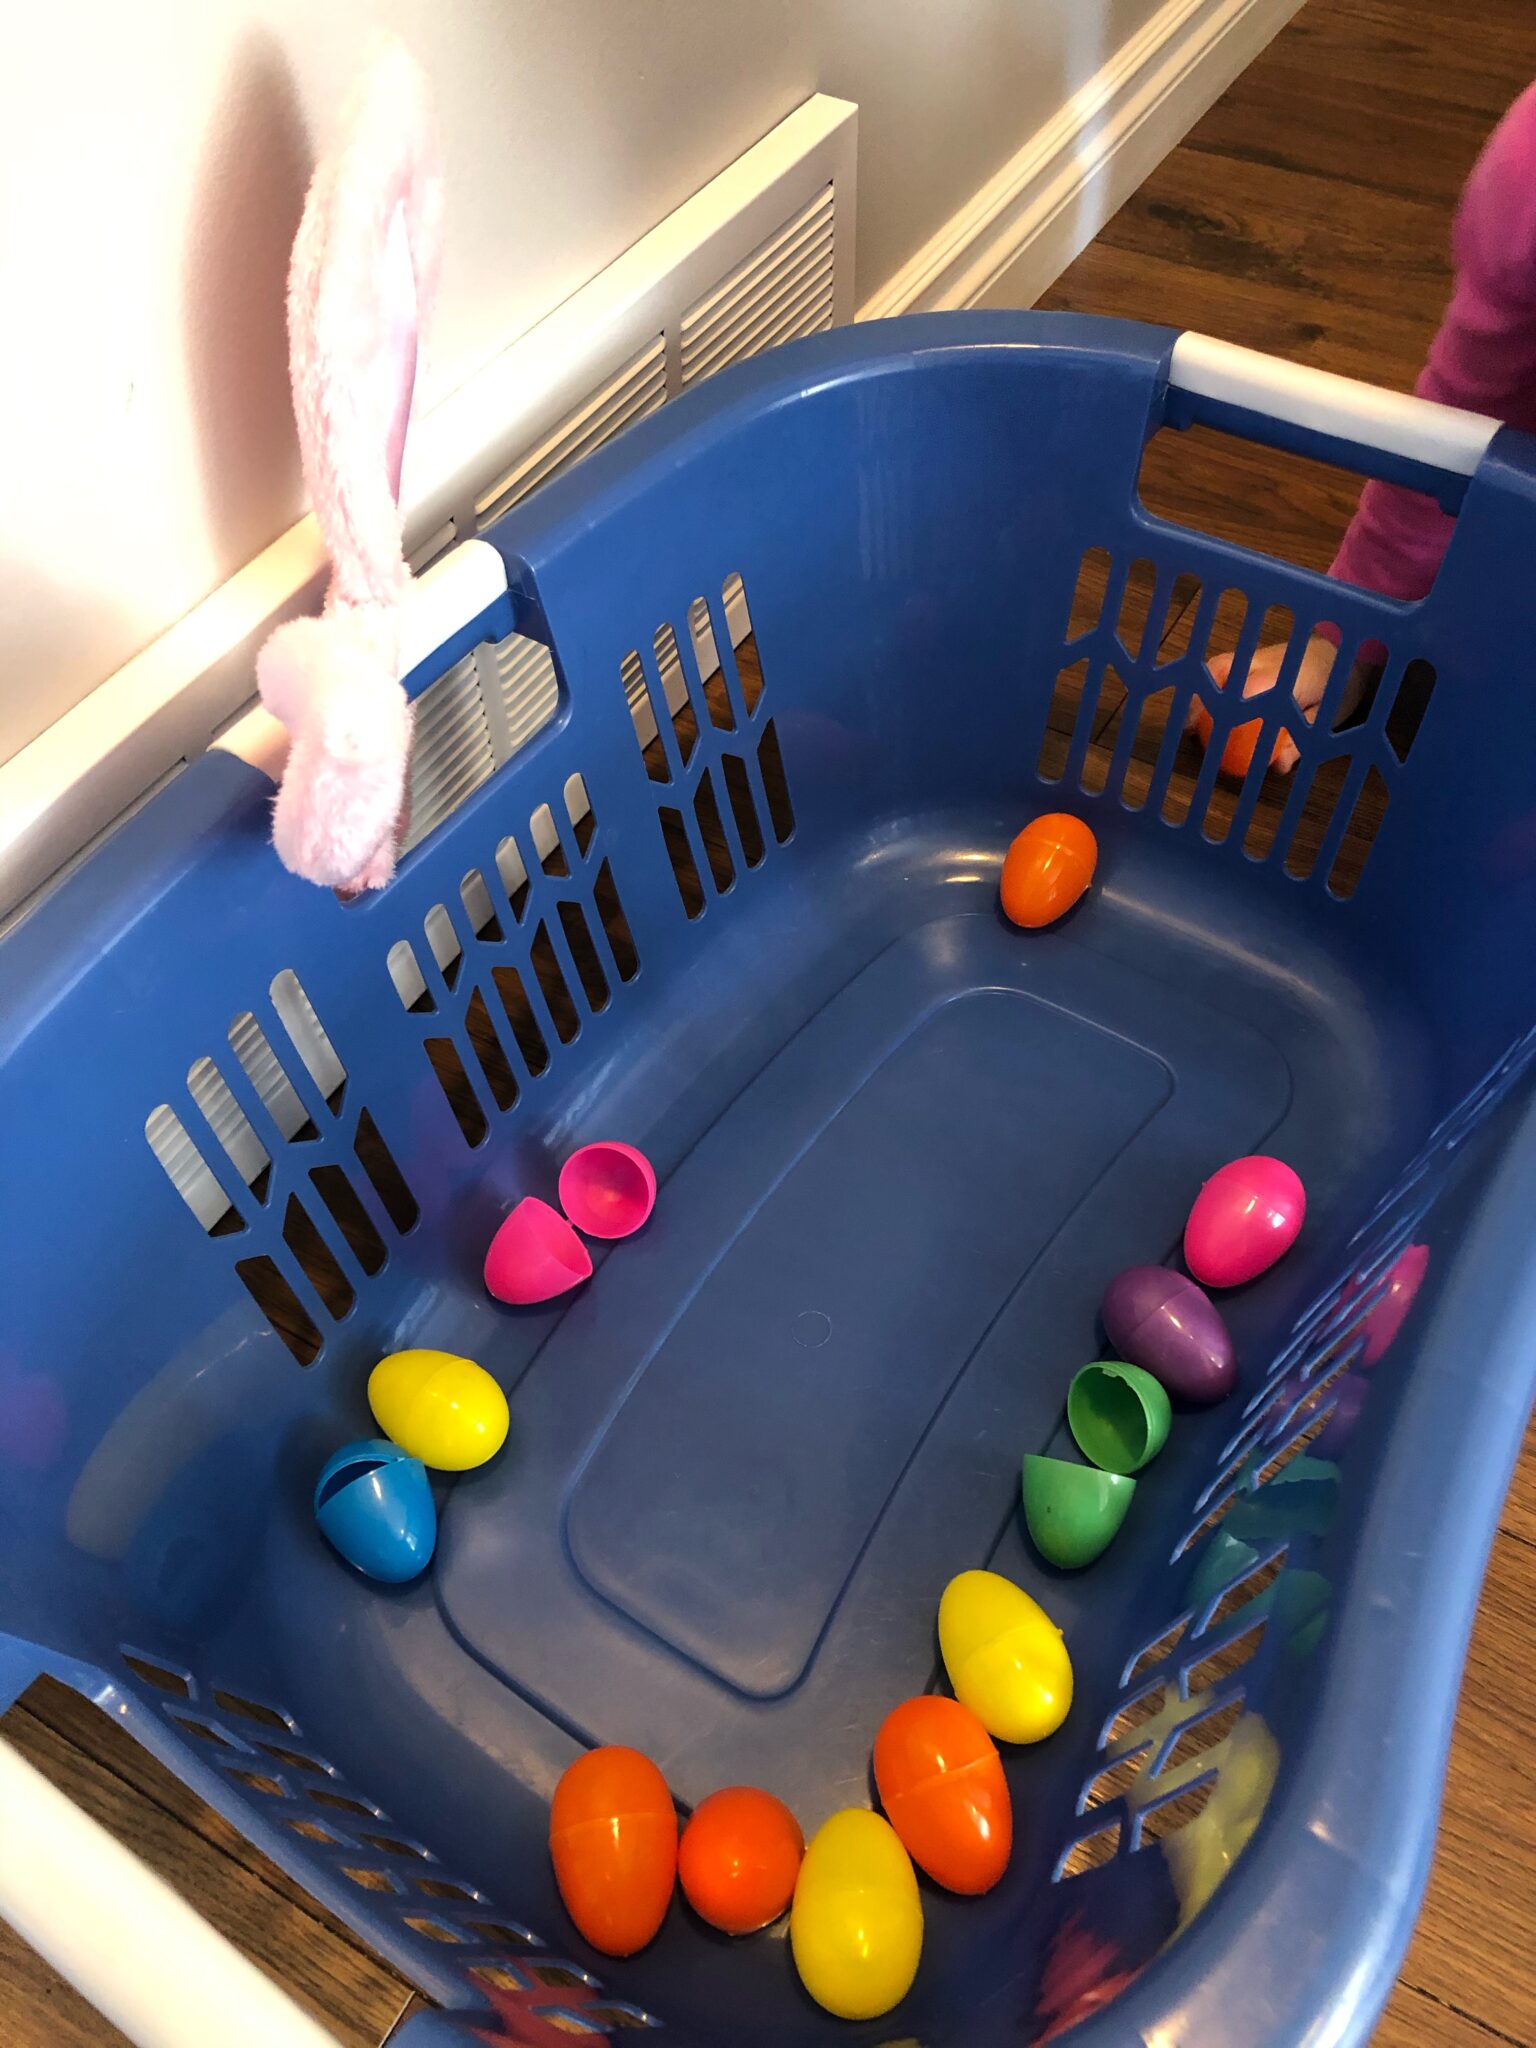 Colorful plastic eggs are for more than scavenger hunts. Learn colors, practice fine motor skills, create patterns, and even learn letters and numbers with these simple activities.